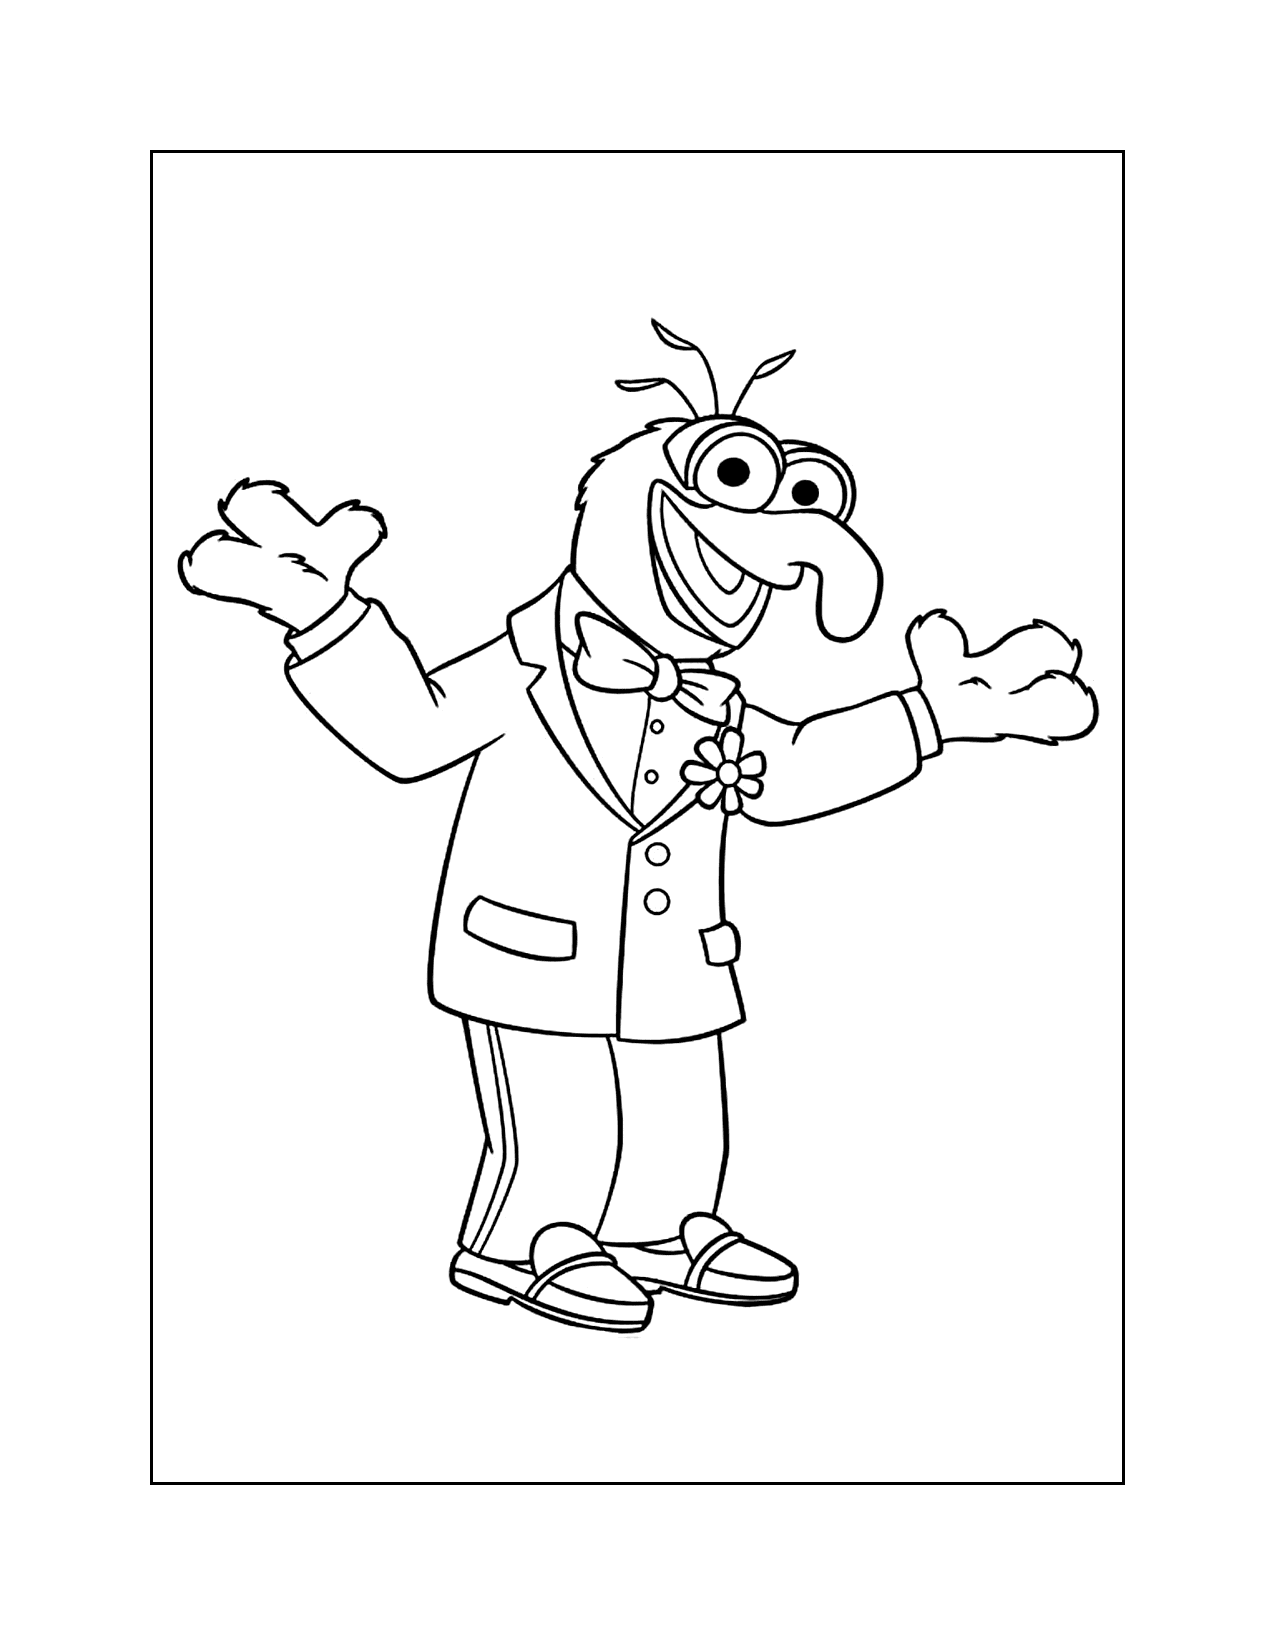 Gonzo In A Tuxedo Coloring Page